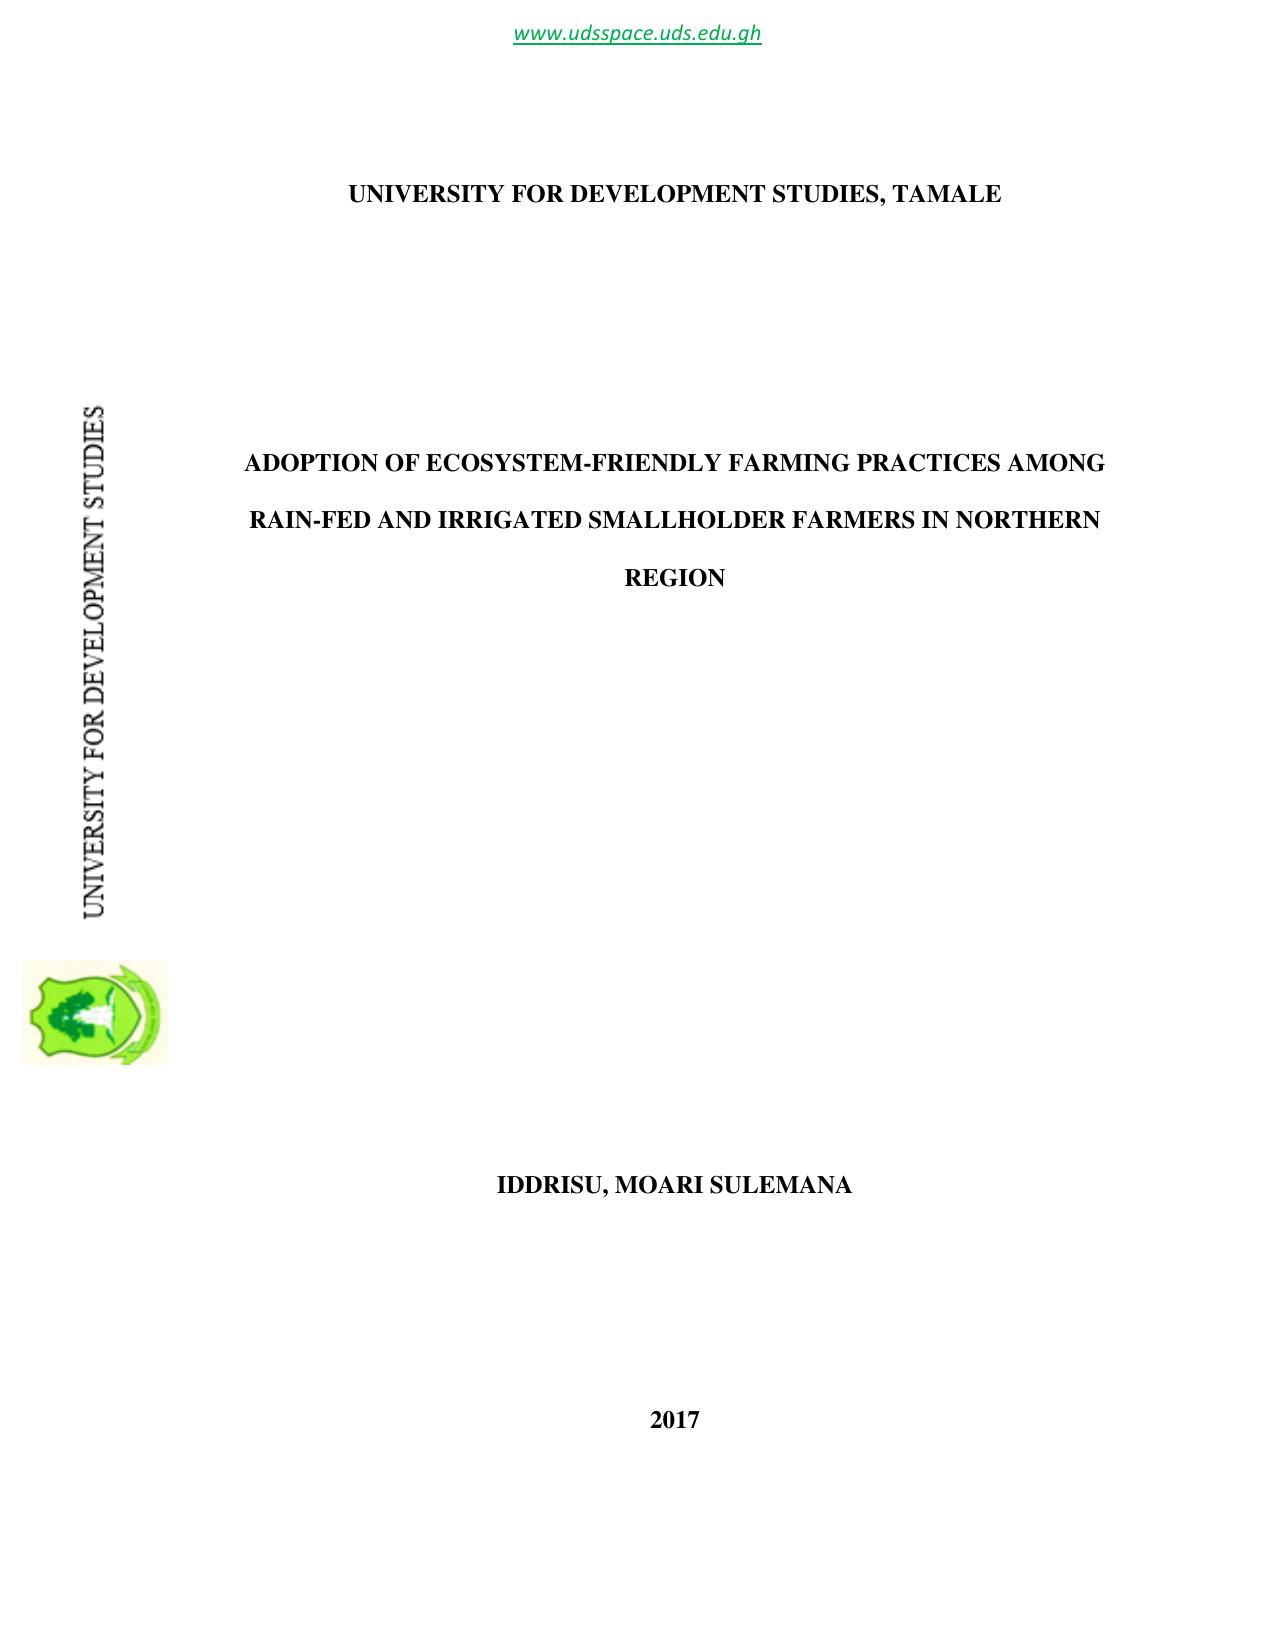 ADOPTION OF ECOSYSTEM-FRIENDLY FARMING PRACTICES AMONG RAIN-FED AND IRRIGATED SMALLHOLDER FARMERS IN NORTHERN REGION 2017